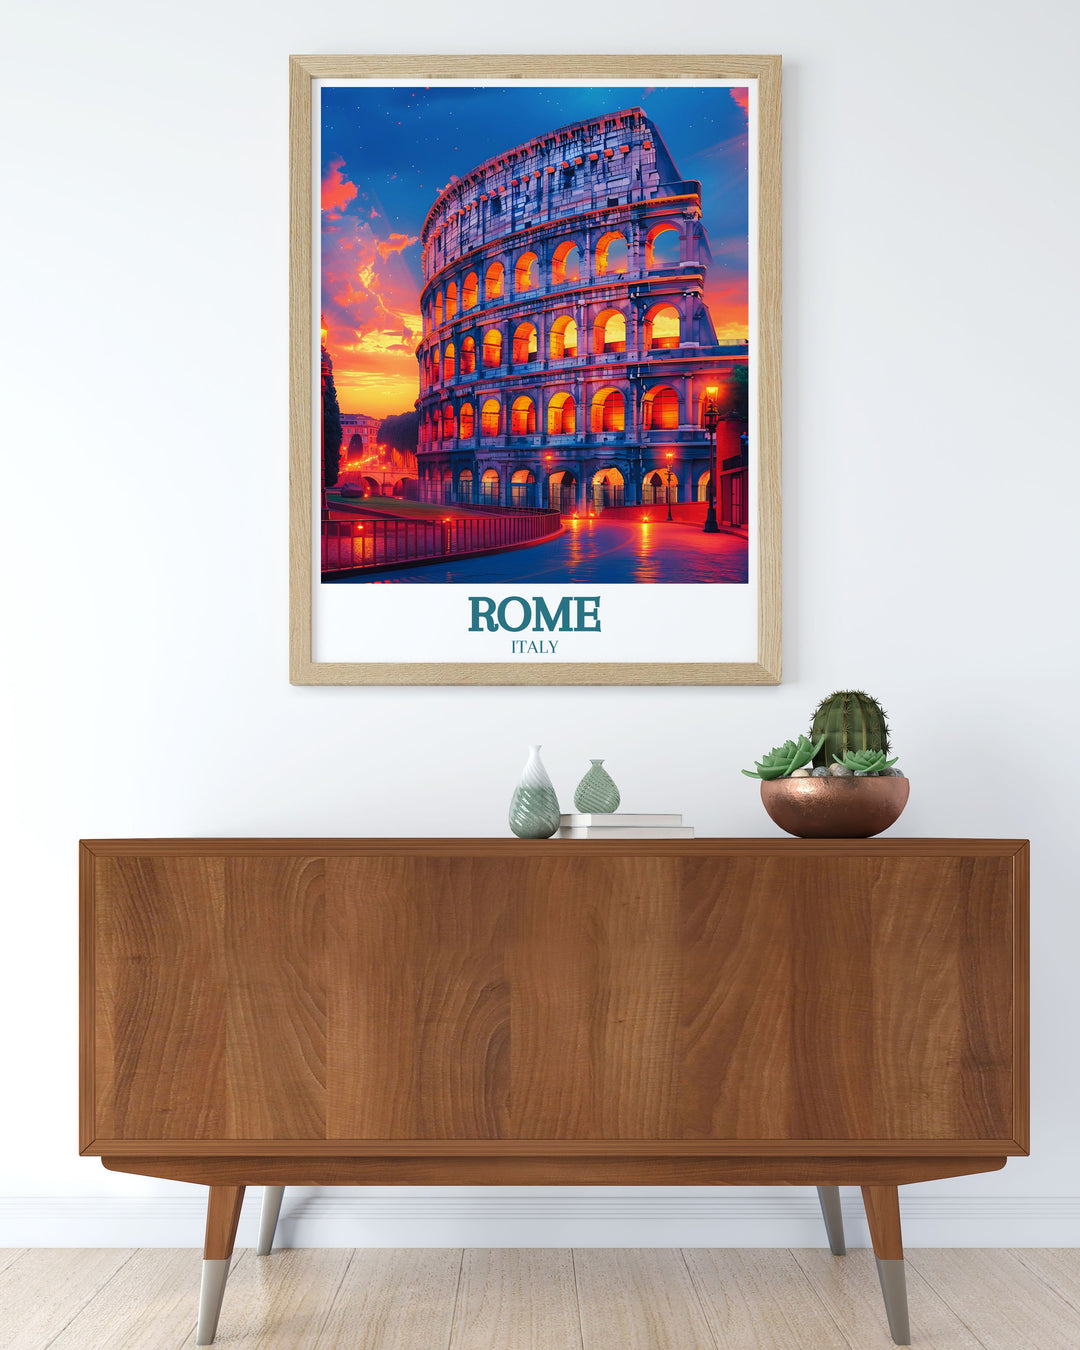 Elegant Rome poster showcasing the iconic Colosseum and Vatican City perfect for those who appreciate historical landmarks and sophisticated decor makes an excellent gift for travel enthusiasts and history buffs alike.